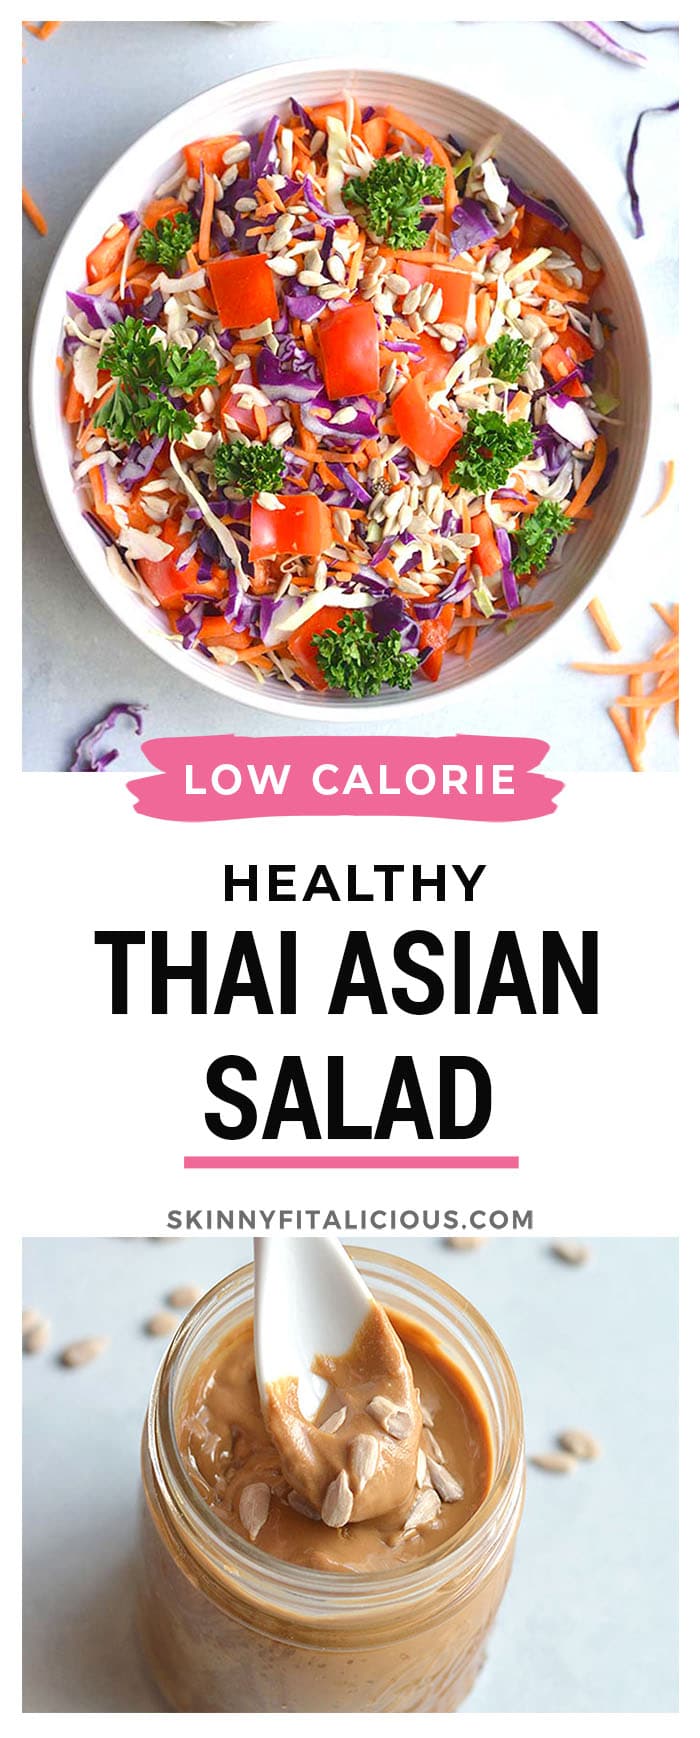 Thai Asian Salad with nut free sunflower dressing! A loaded detox salad with cabbage, carrots, and bell peppers tossed in a spicy Asian dressing. Healthy fat and carbs unite!